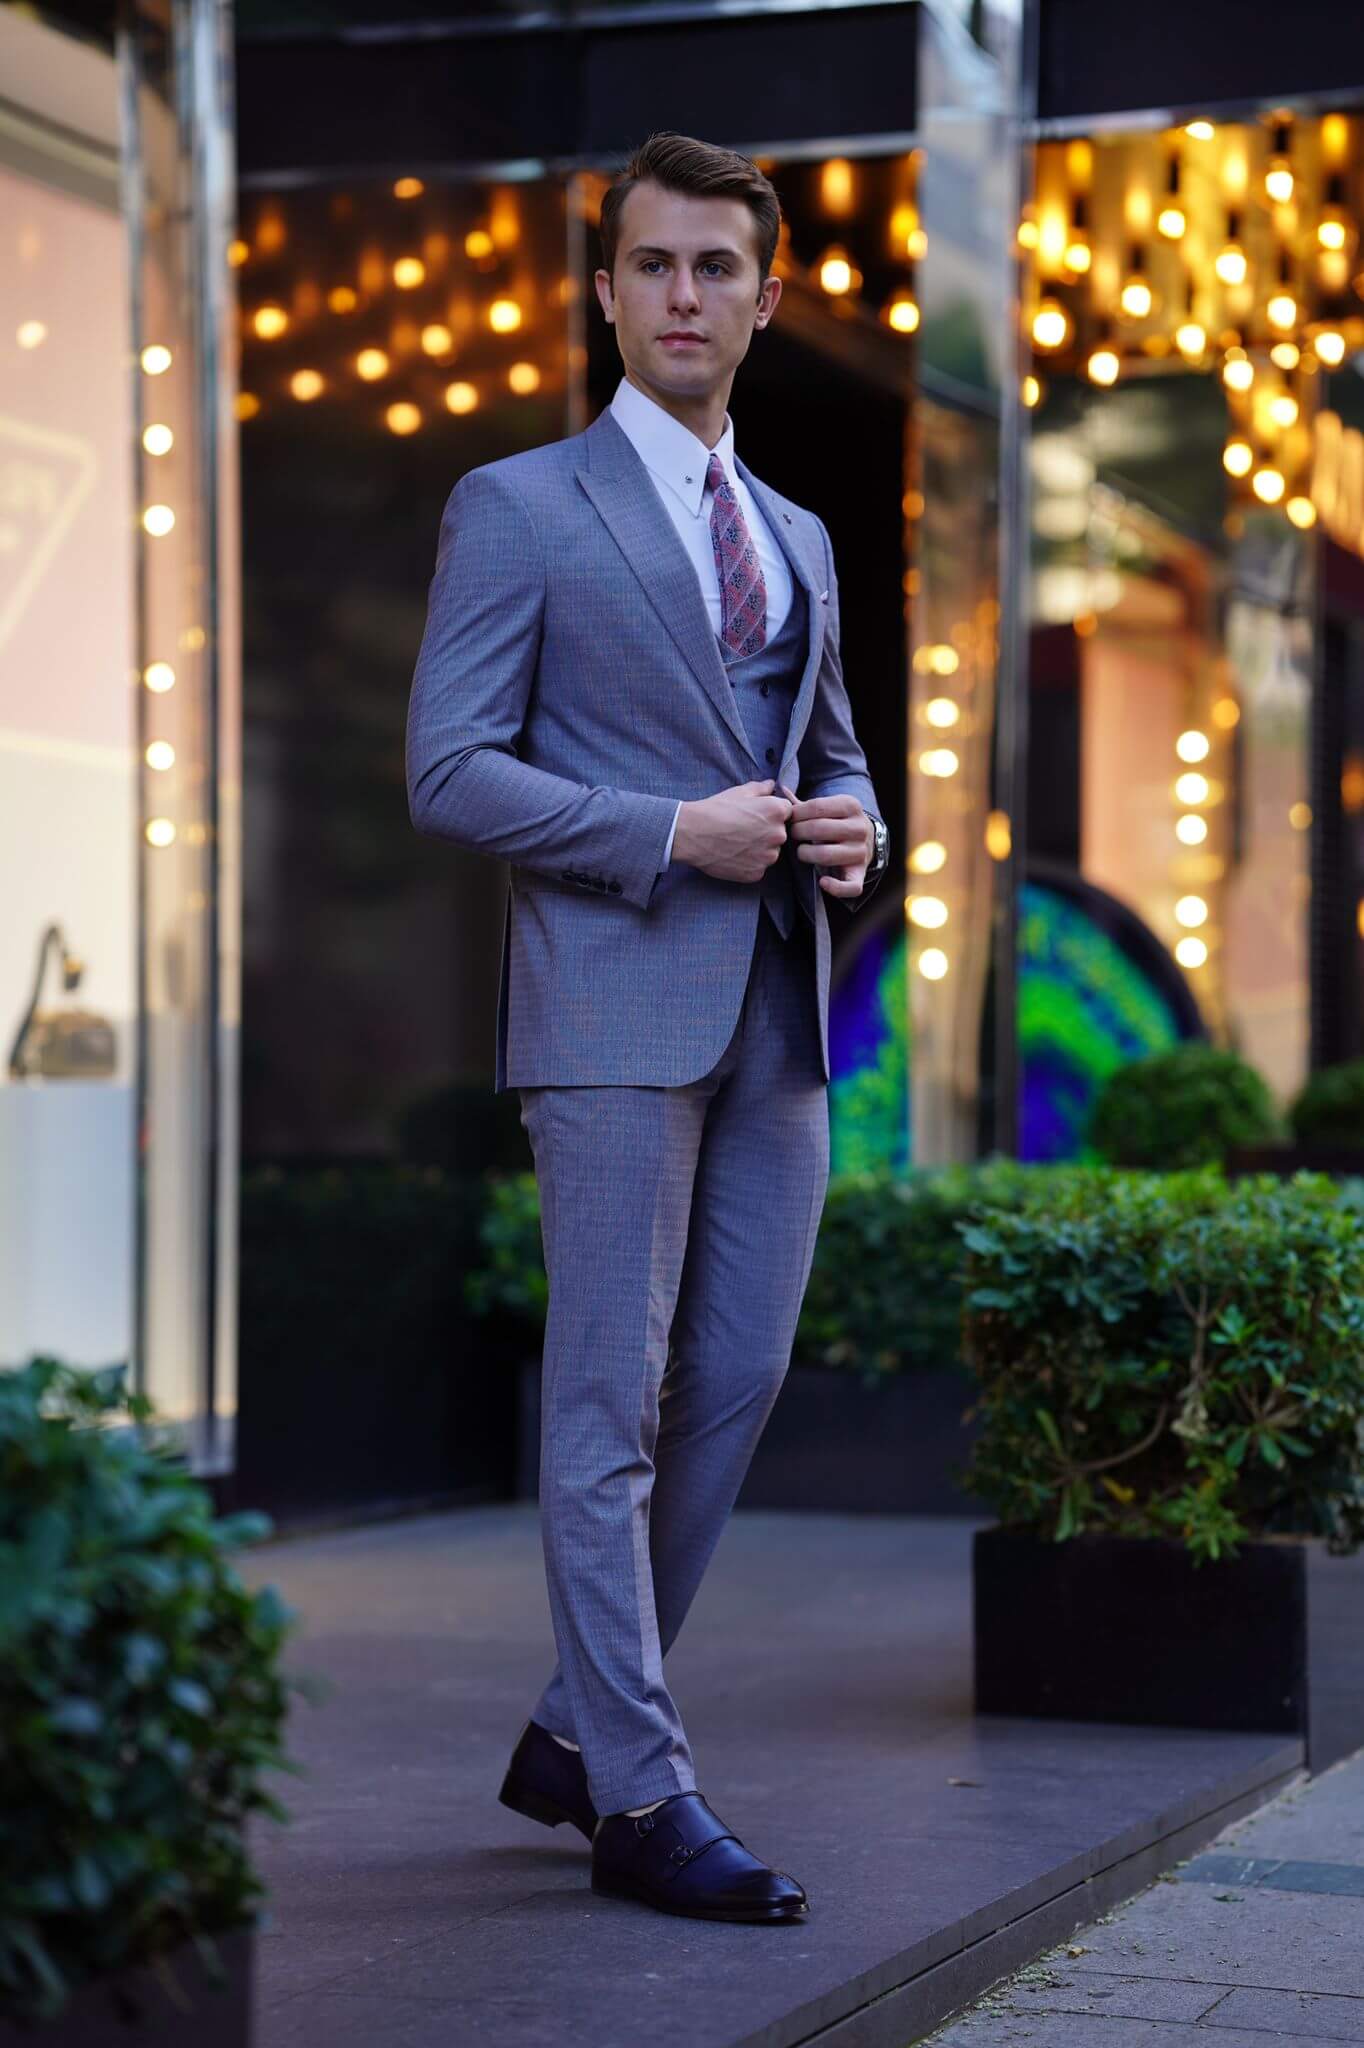 A Gray Wool Suit on display.